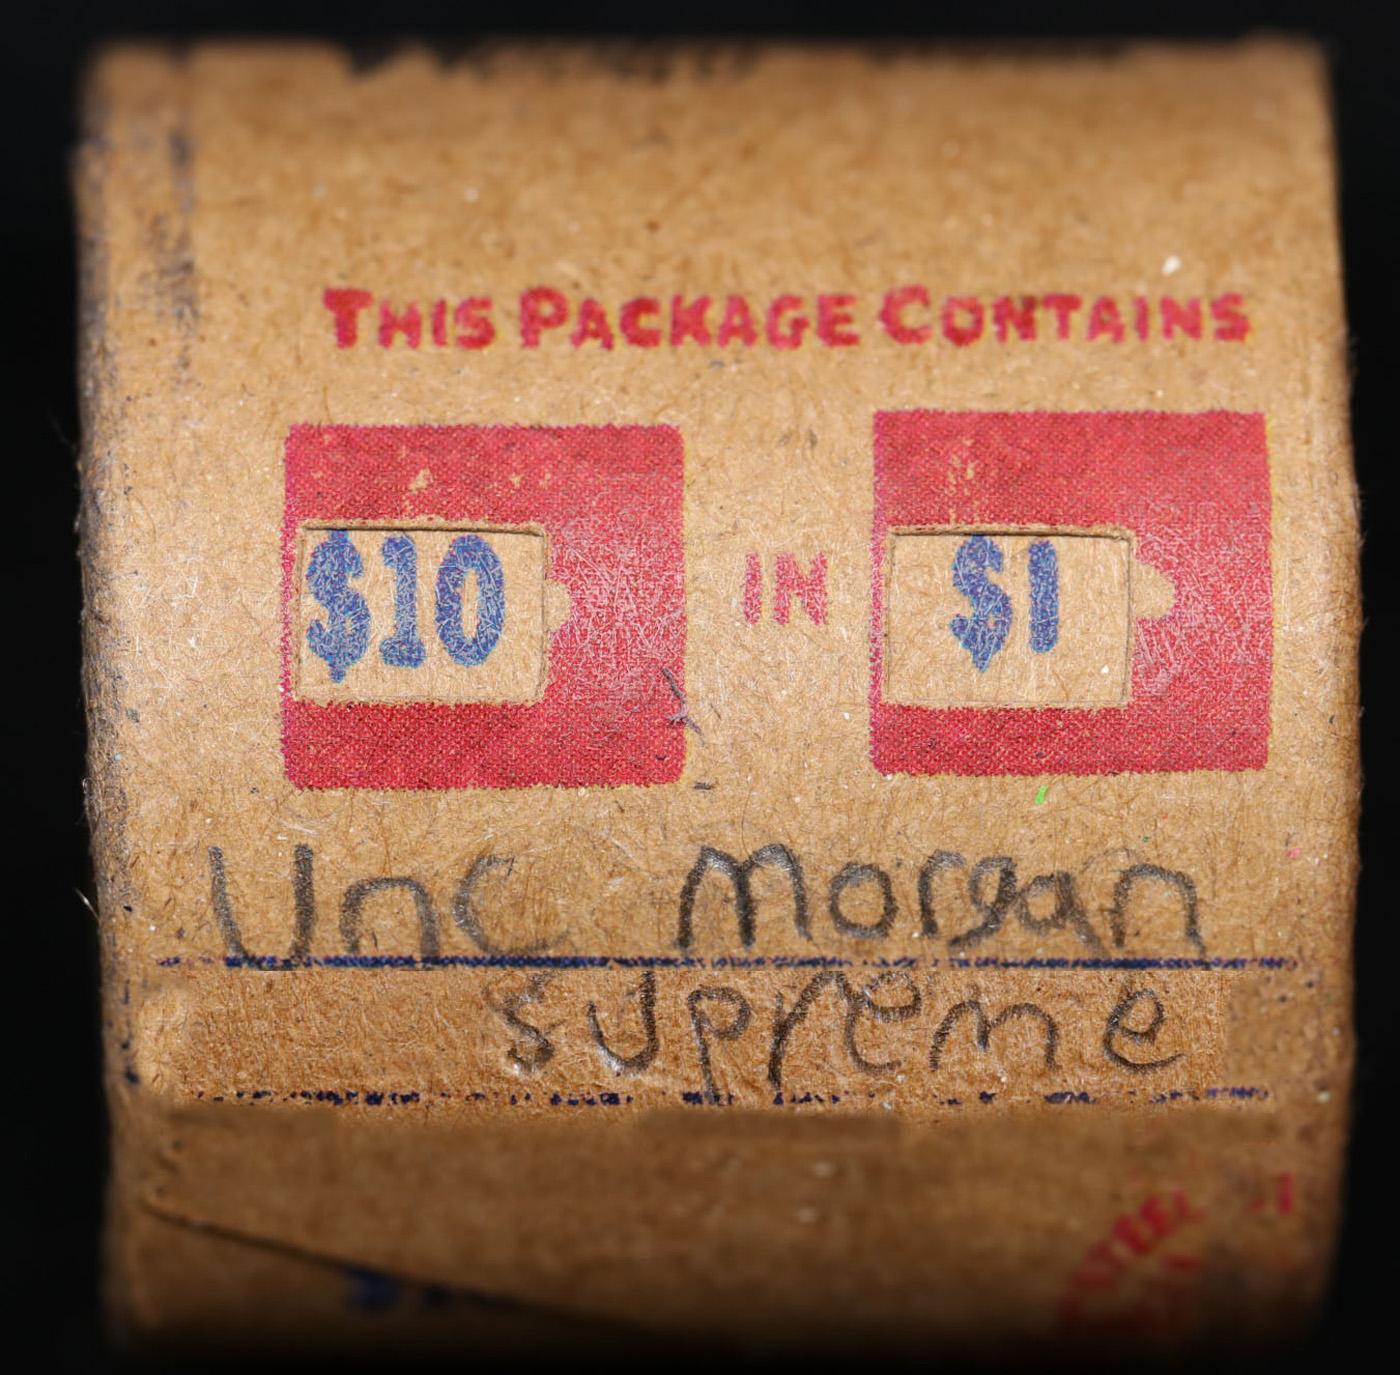 *EXCLUSIVE* x10 Morgan Covered End Roll! Marked "Unc Morgan Supreme"! - Huge Vault Hoard  (FC)